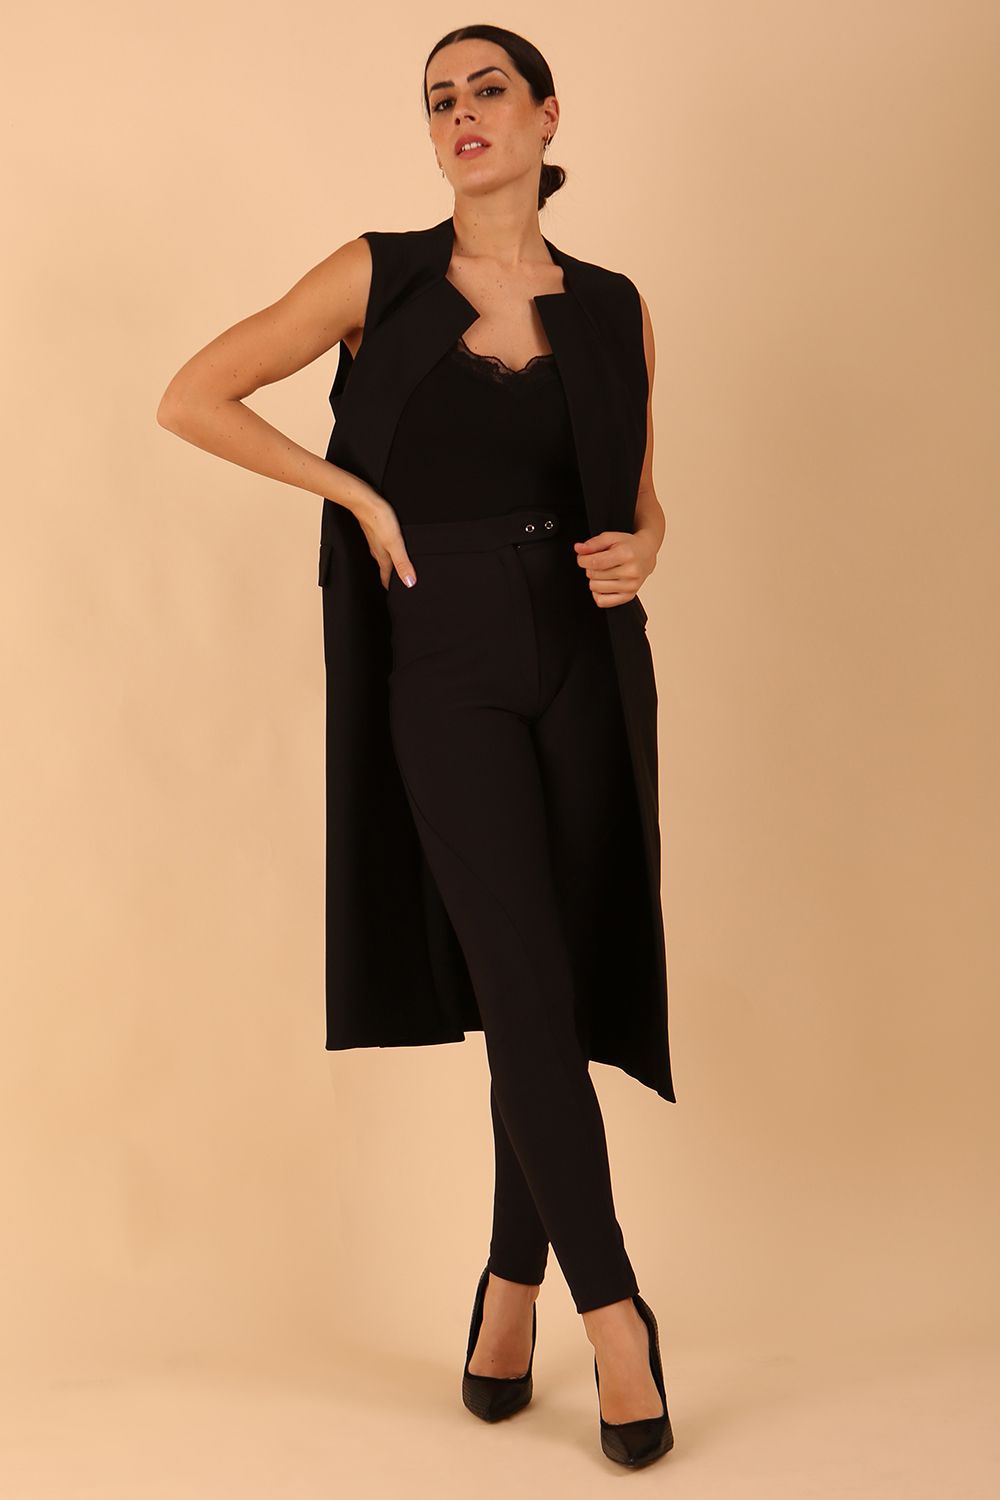 model wearing a divacatwalk Seed Harvard Sleeveless Coat midi length in black colour front